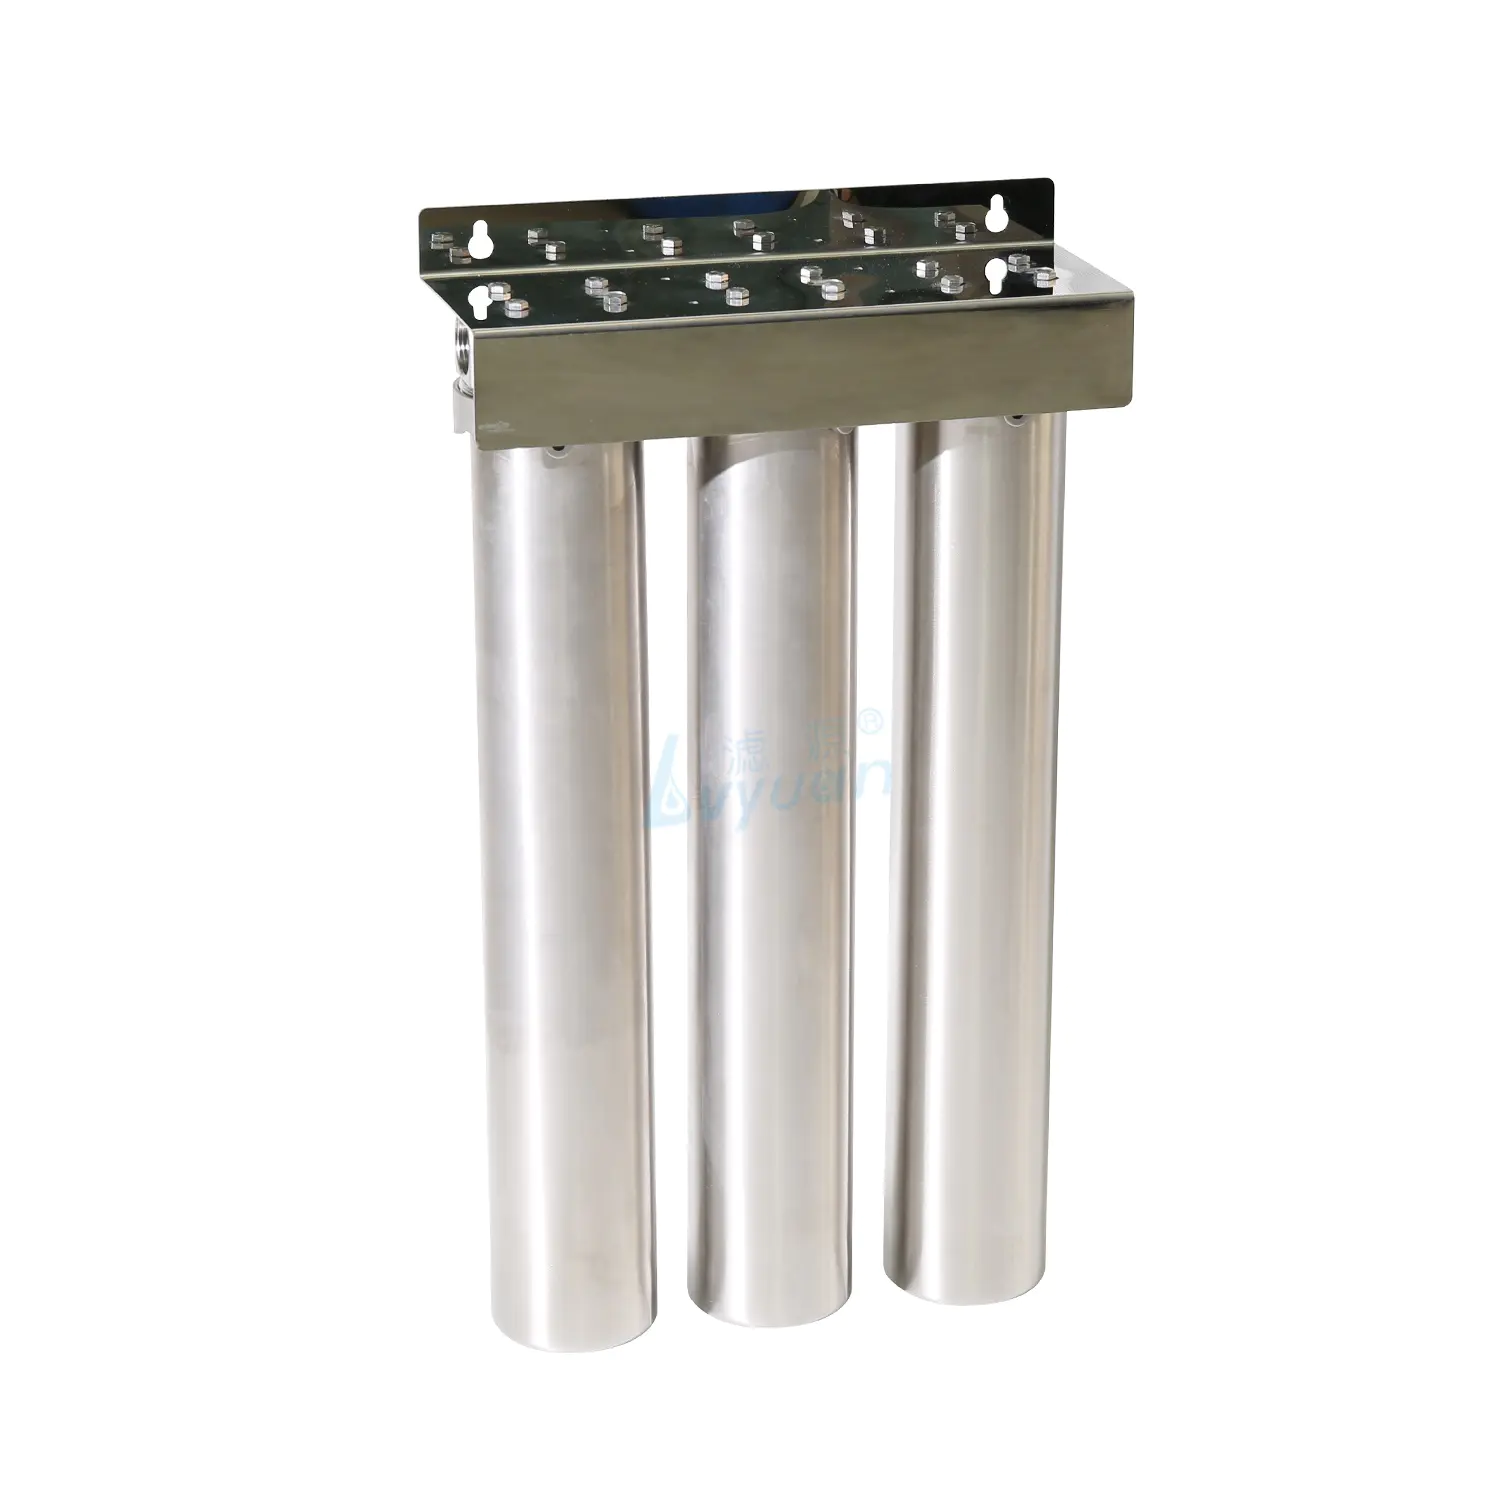 jumbo housing system water filter stainless steel housing filter 10 inch